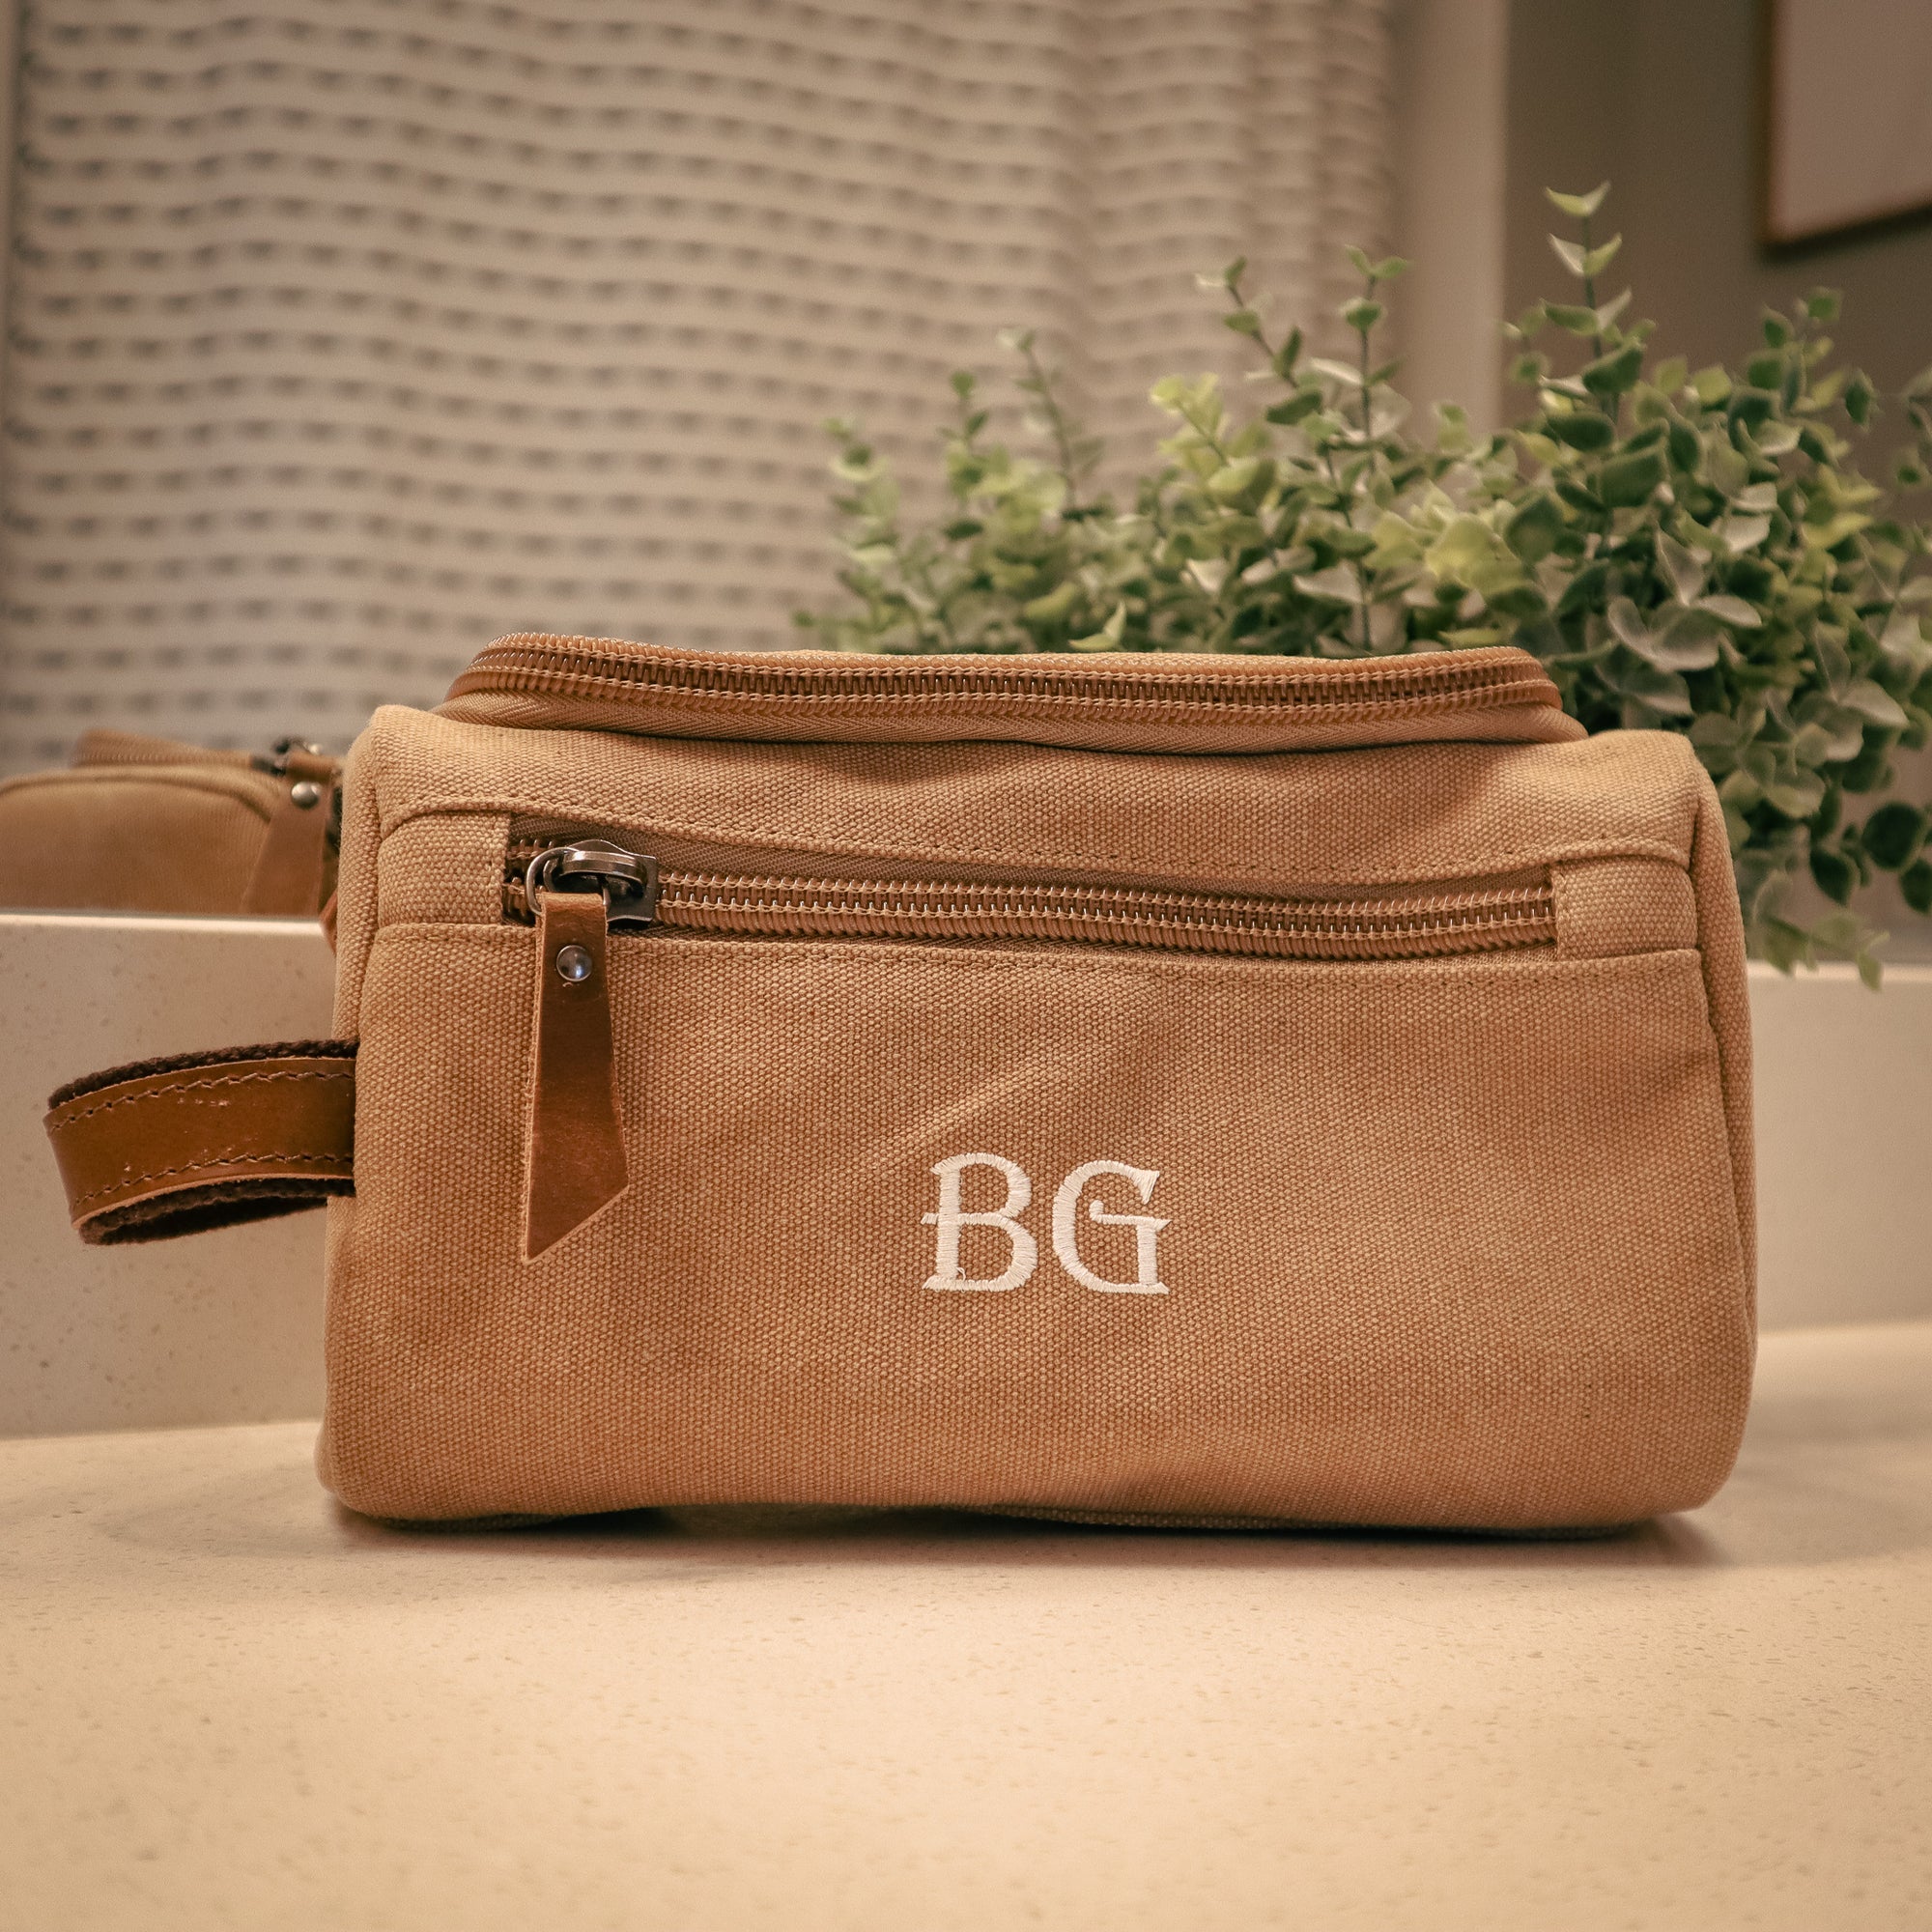 Groovy Guy Leather Personalized Toiletry Bag with Monogrammed